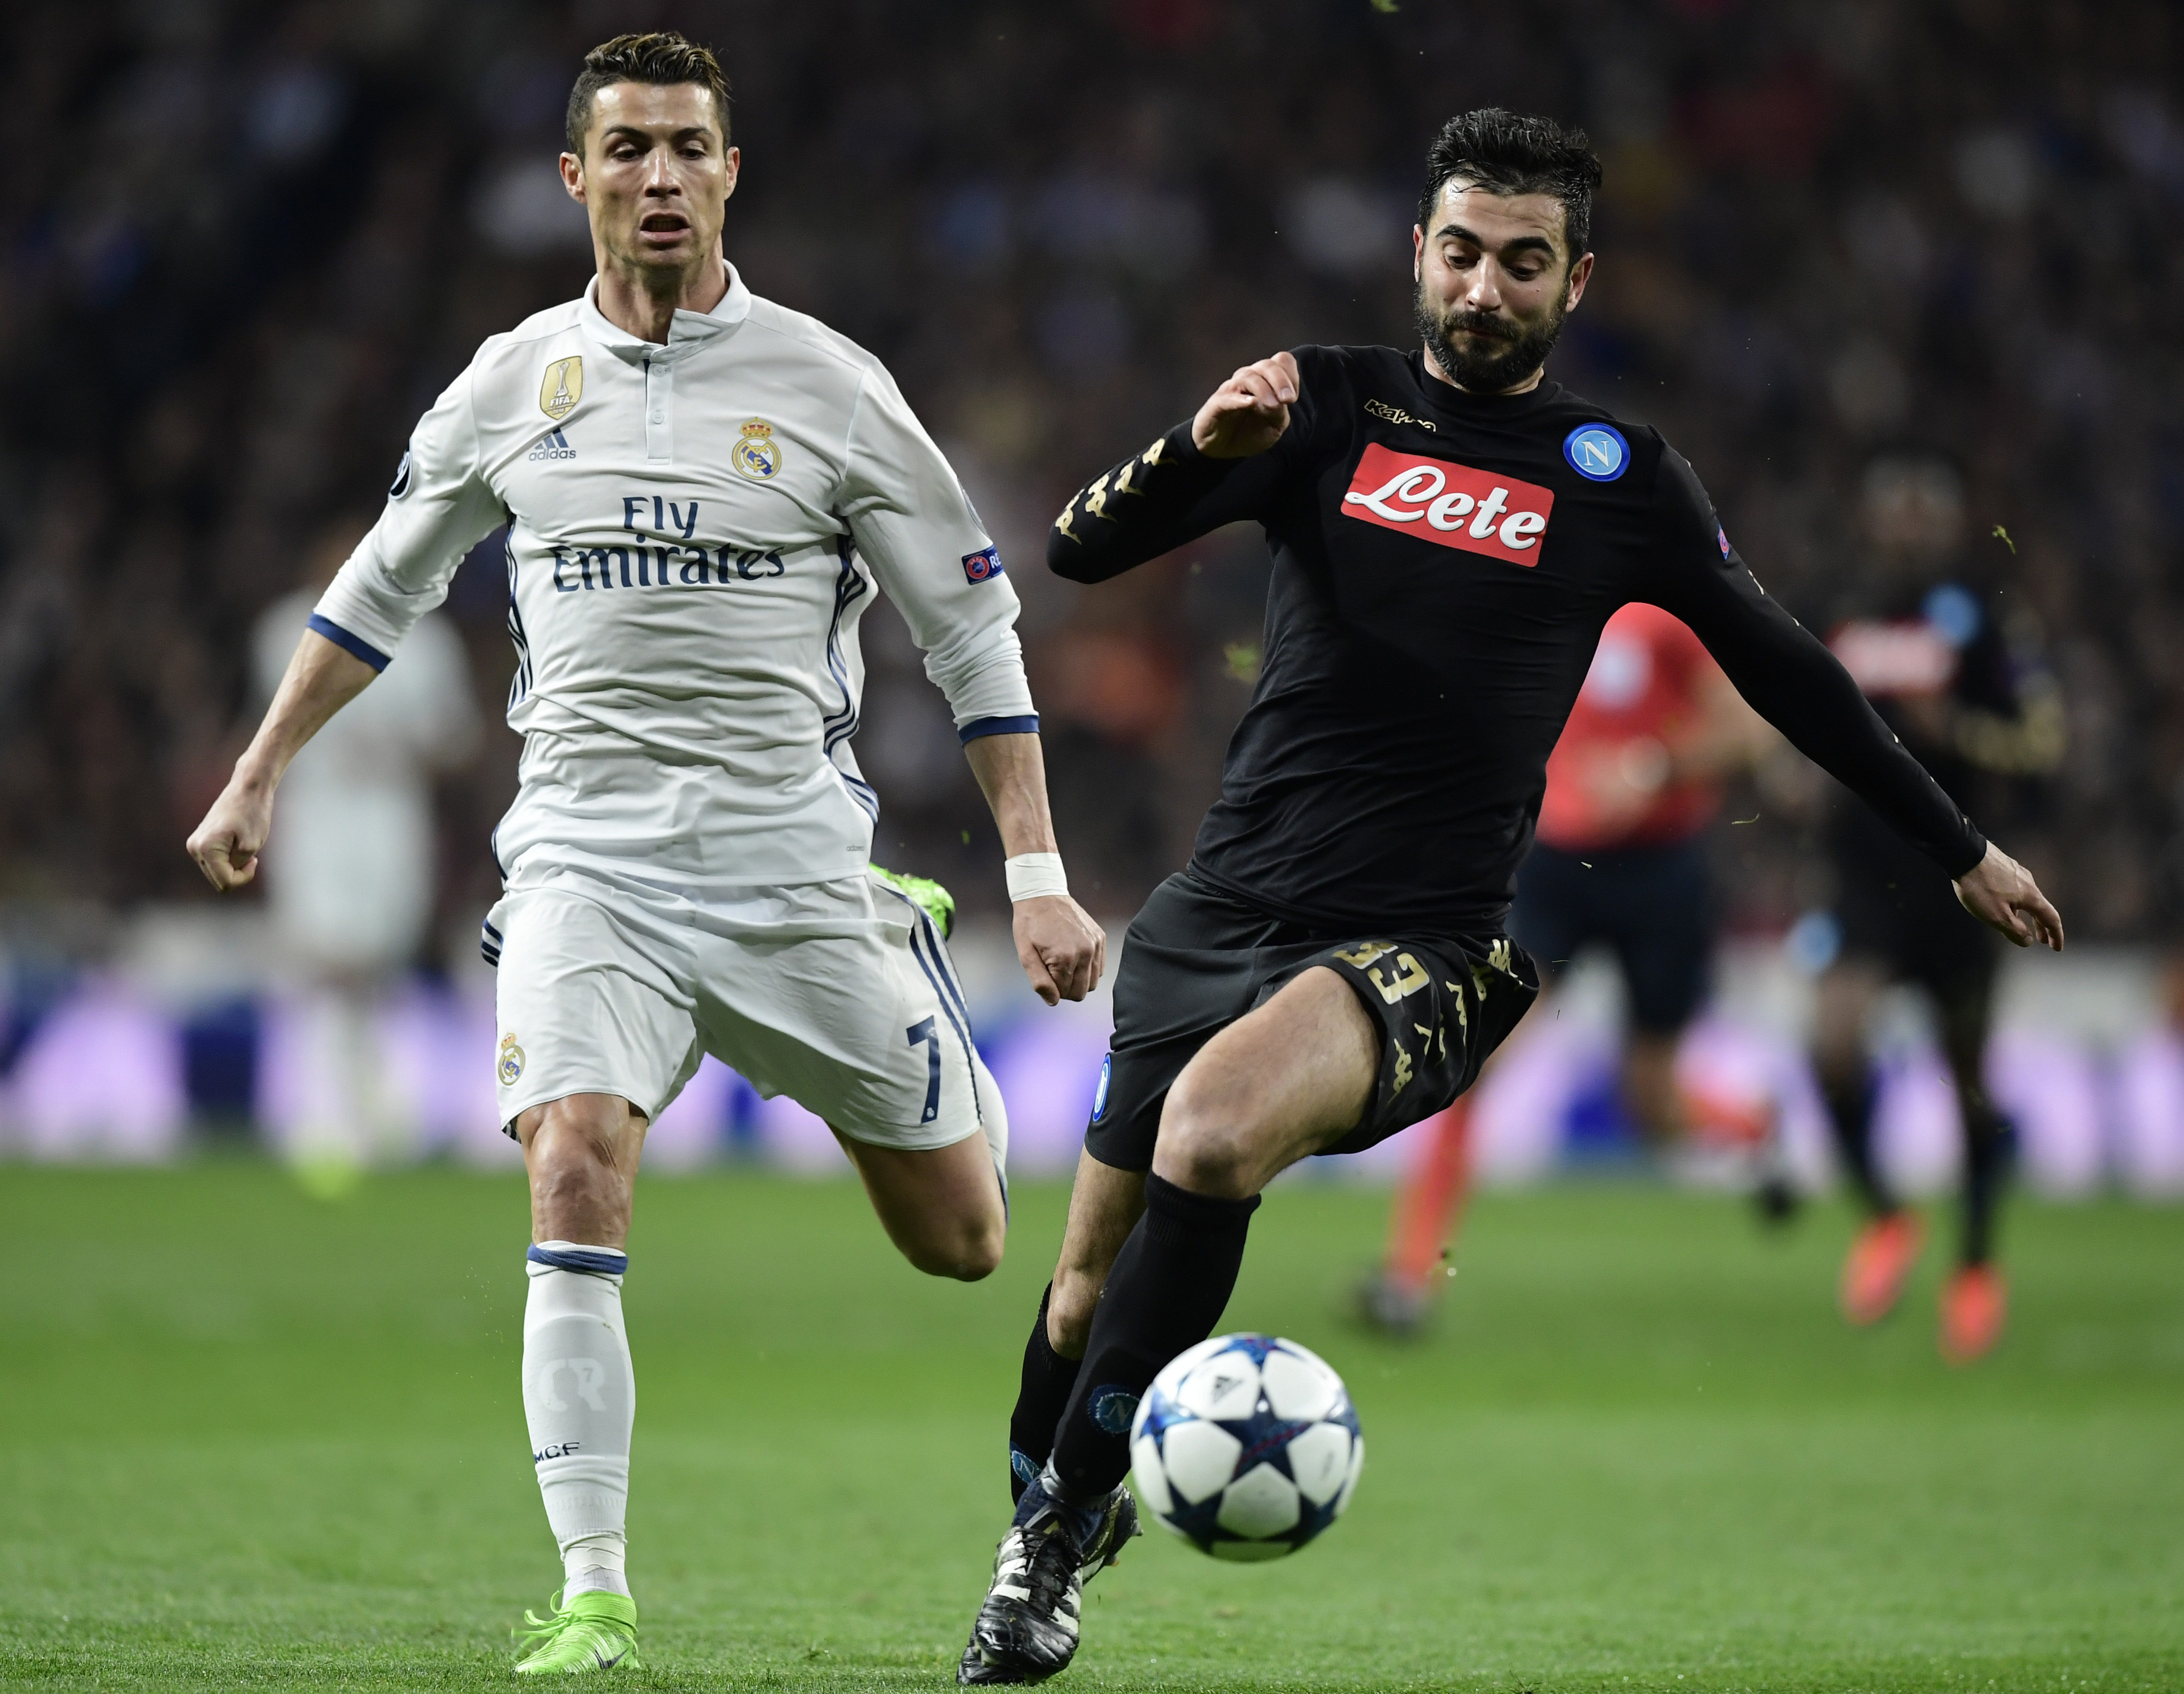 Real Madrid's Portuguese forward Cristiano Ronaldo (L) vies with Napoli's defender from Spain Raul Albiol during the UEFA Champions League round of 16 first leg football match Real Madrid CF vs SSC Napoli at the Santiago Bernabeu stadium in Madrid on February 15, 2017. / AFP / JAVIER SORIANO        (Photo credit should read JAVIER SORIANO/AFP/Getty Images)